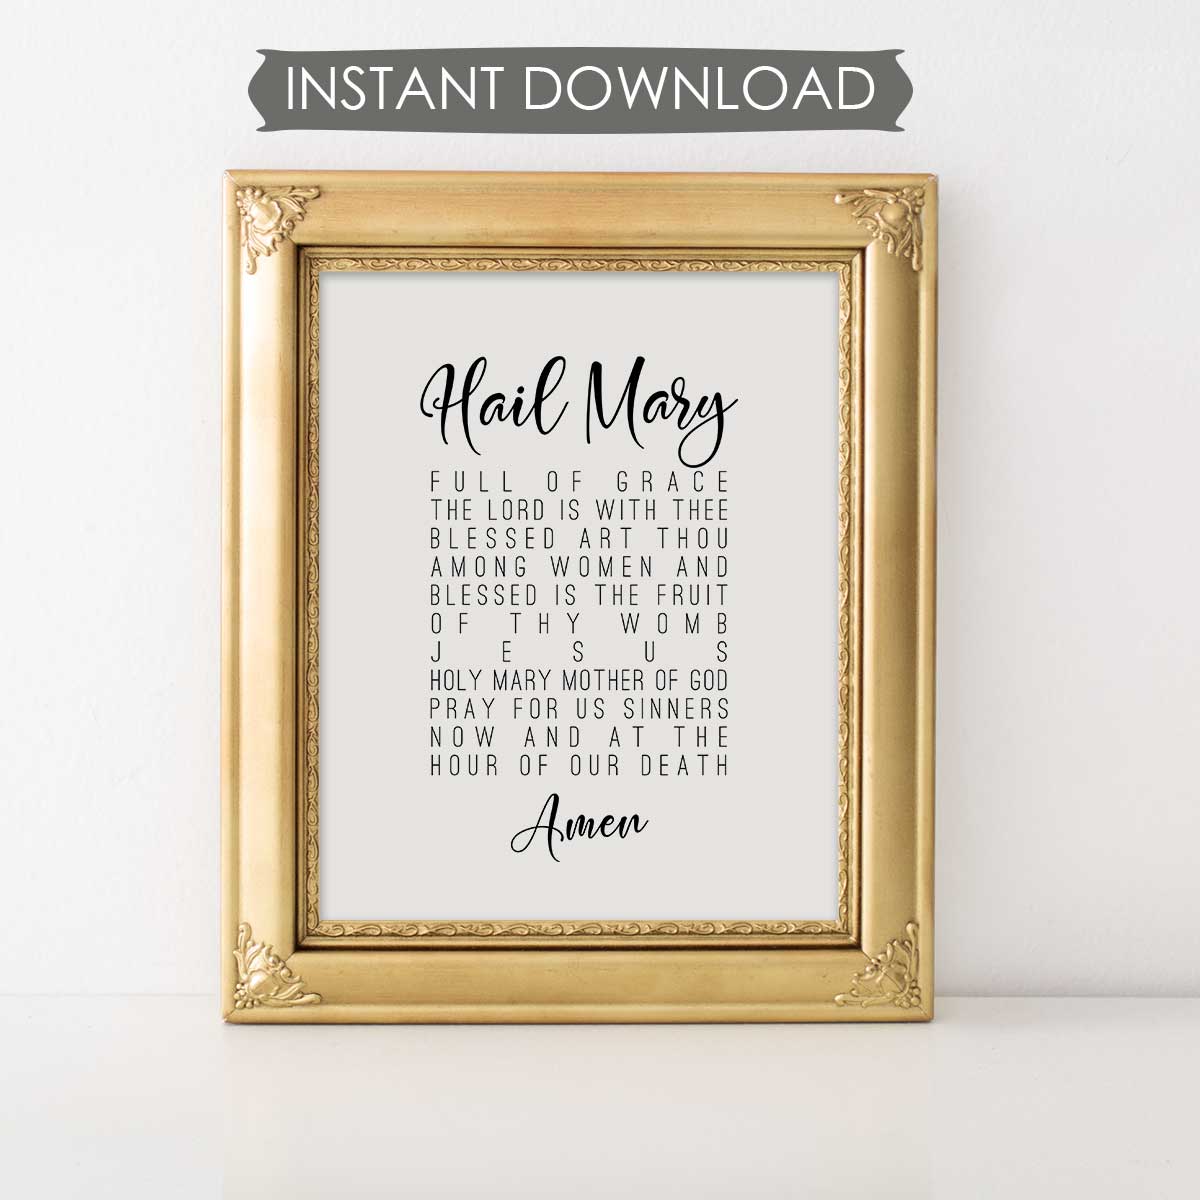 Hail Mary Prayer INSTANT DOWNLOAD Printable Wall Art